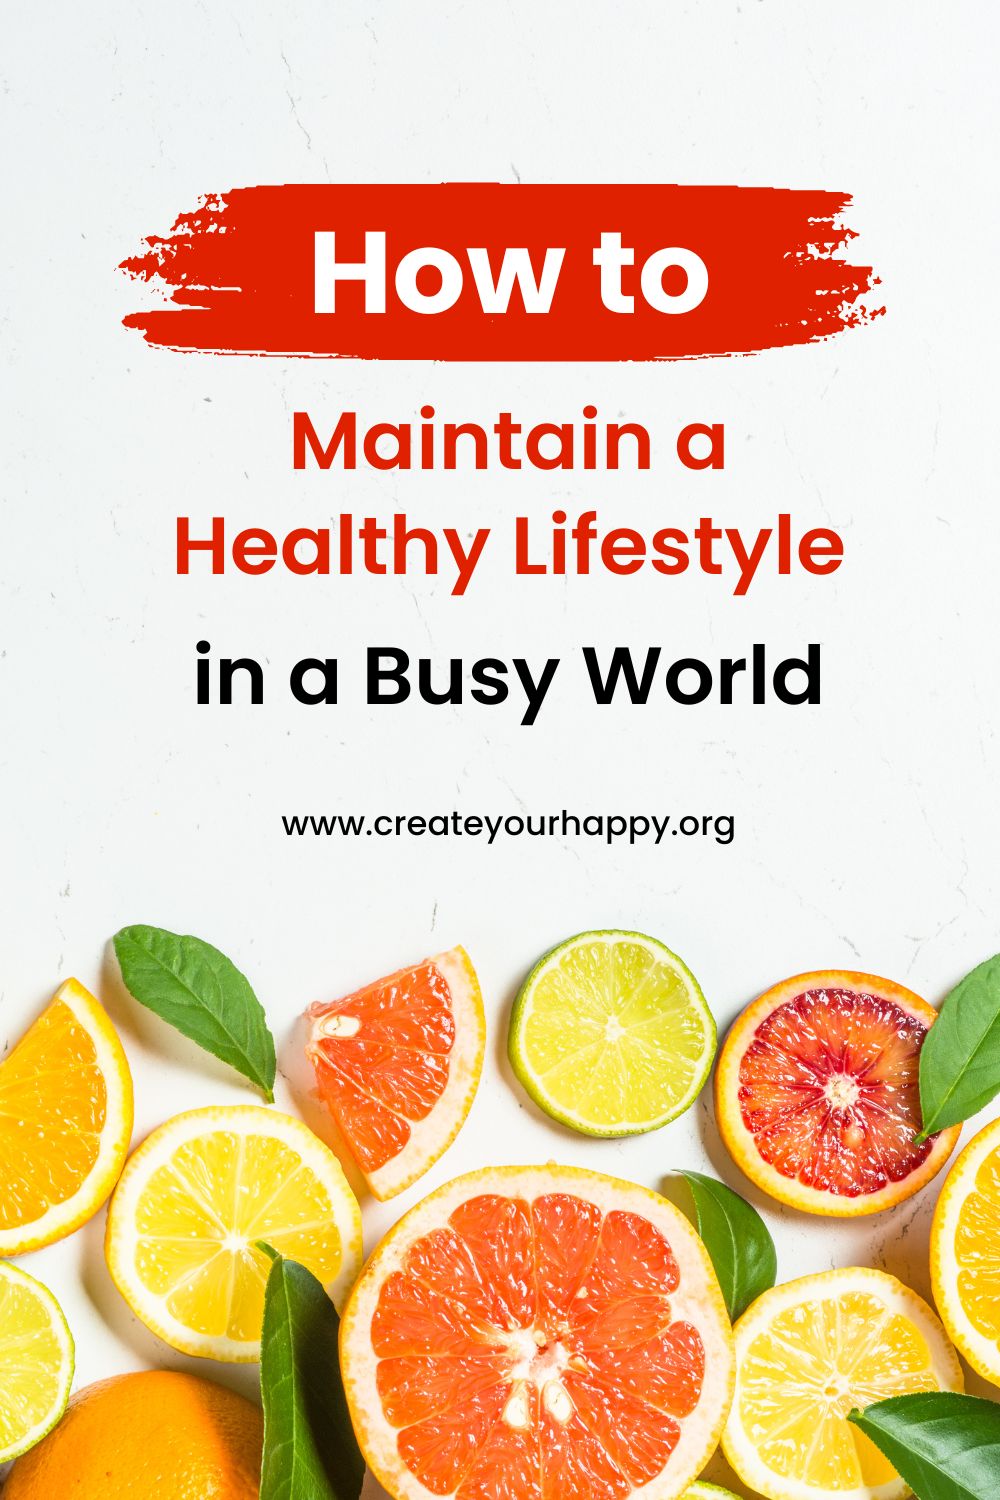 How to Maintain a Healthy Lifestyle in a Busy World